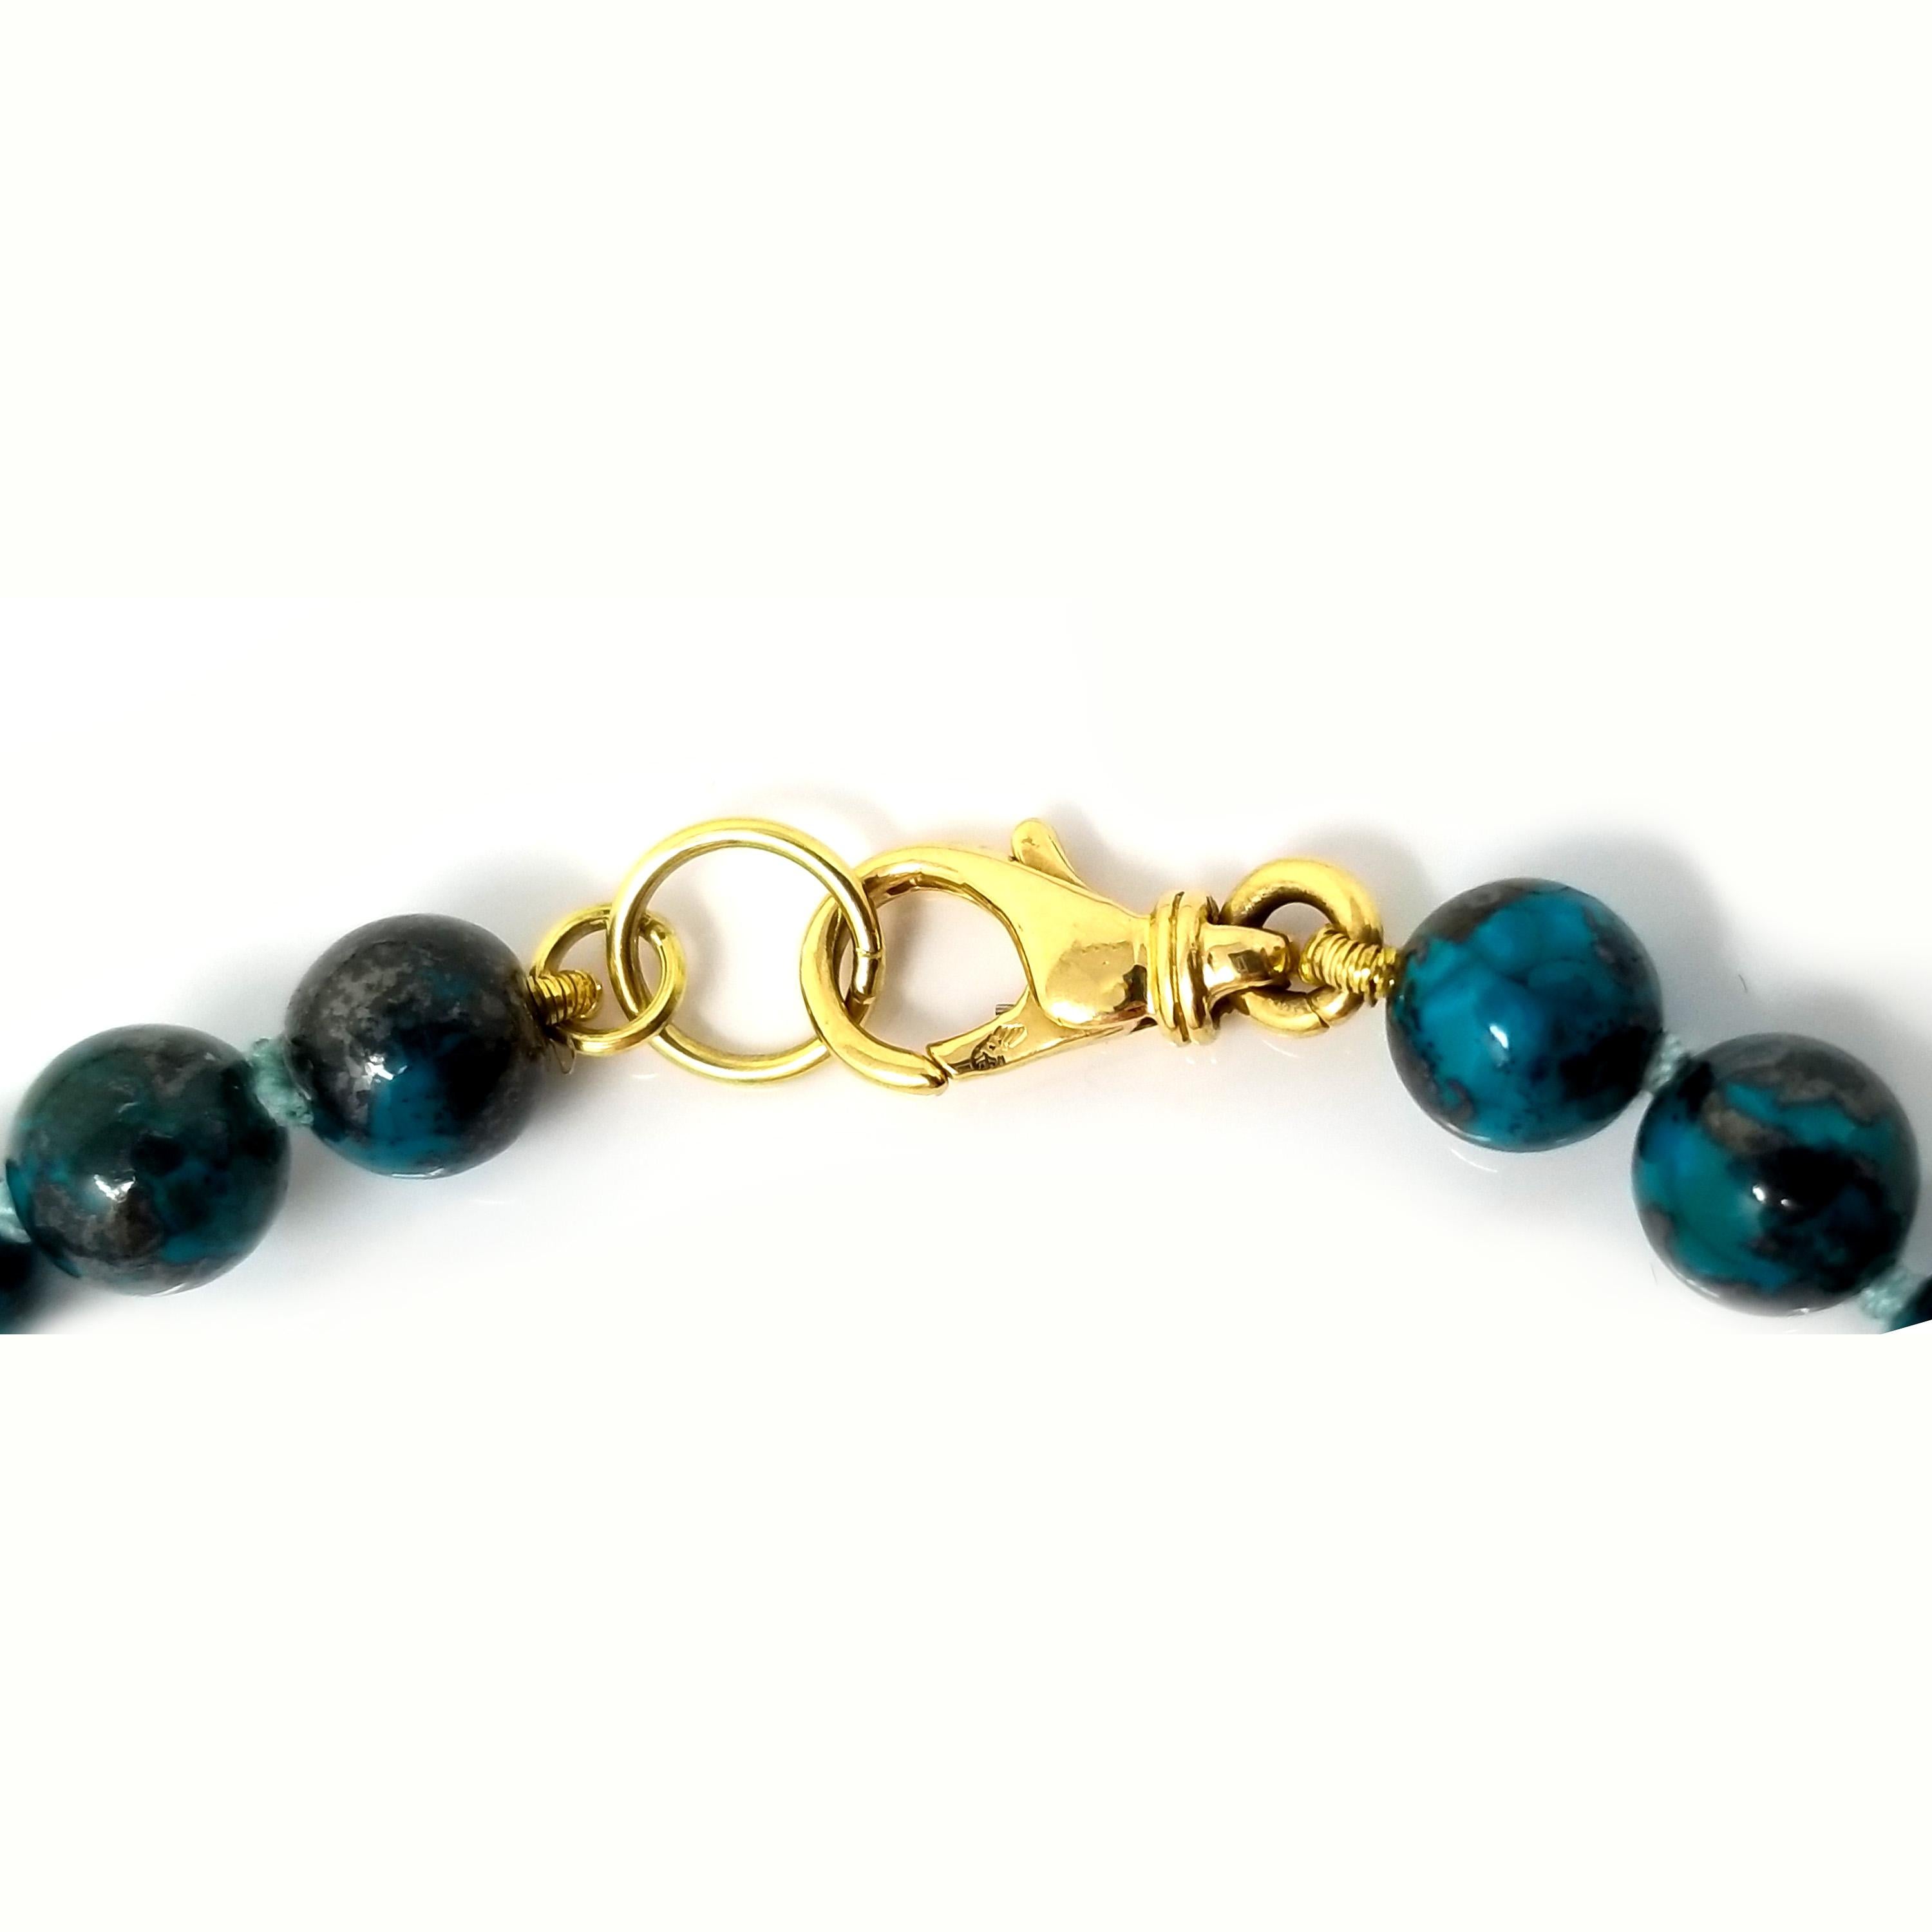 Women's or Men's Chrysocolla and 18kt Beaded Necklace by Cynthia Scott Jewelry